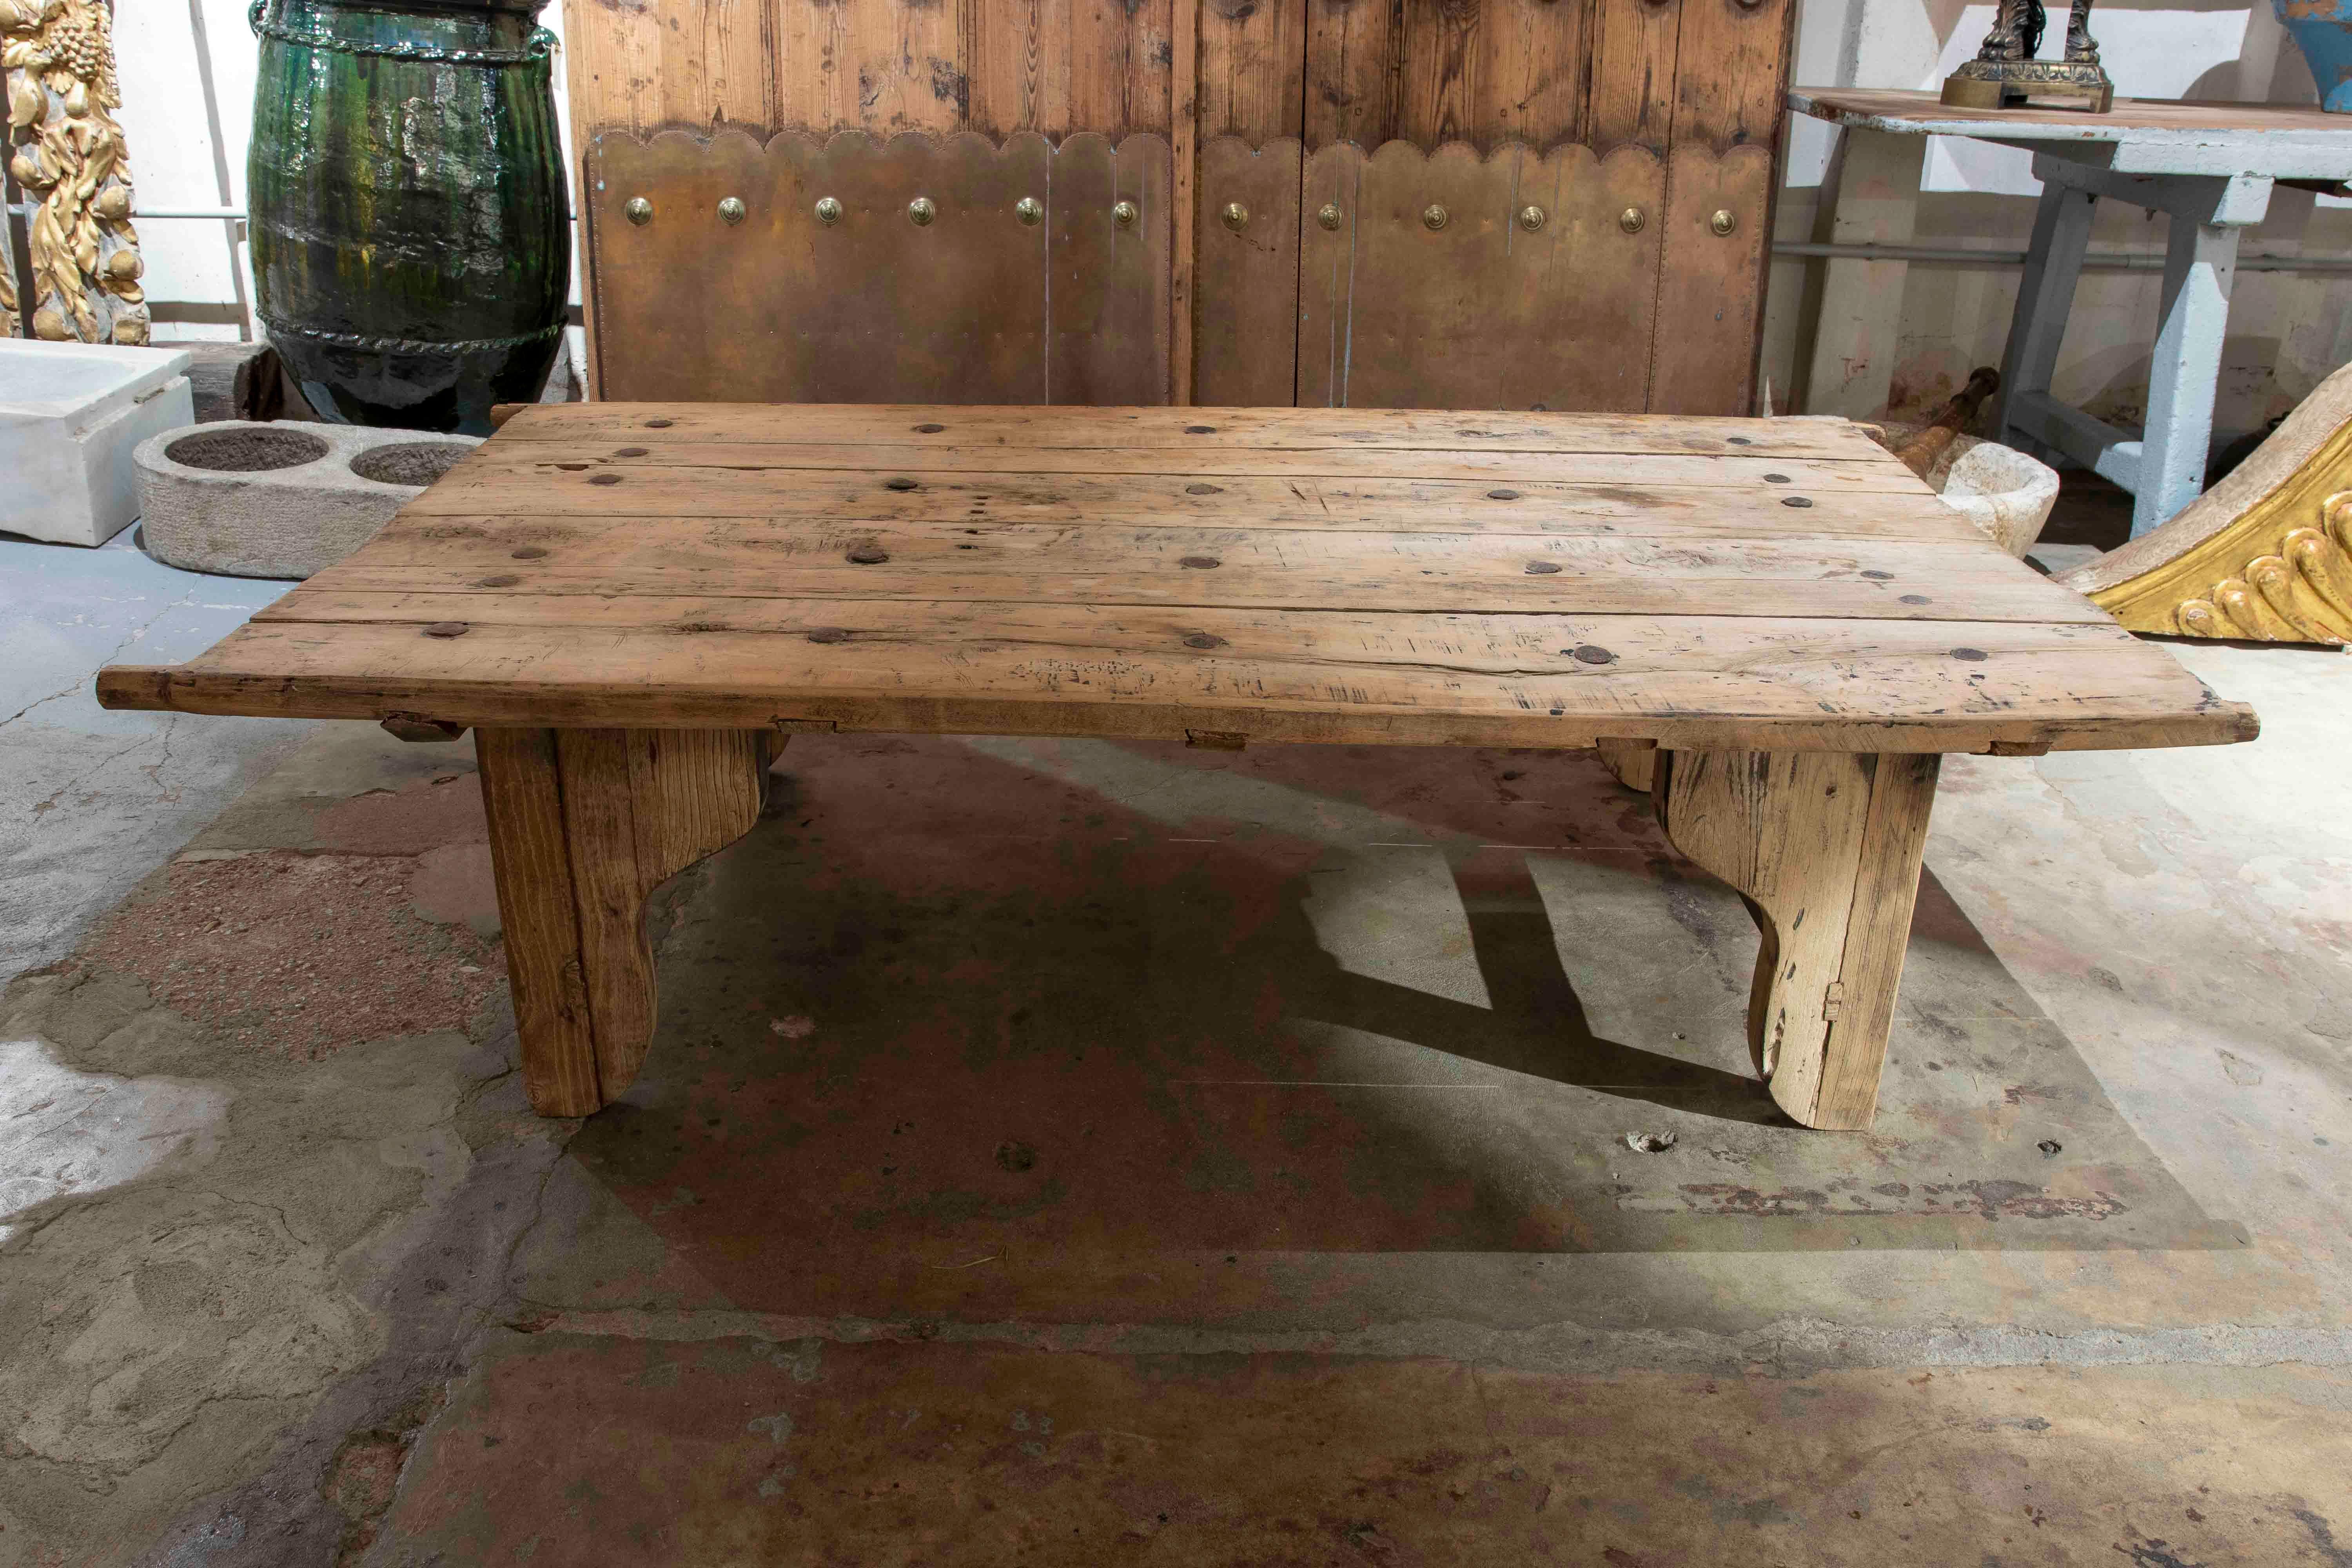 1980s Wooden Table Made with Antique Door.